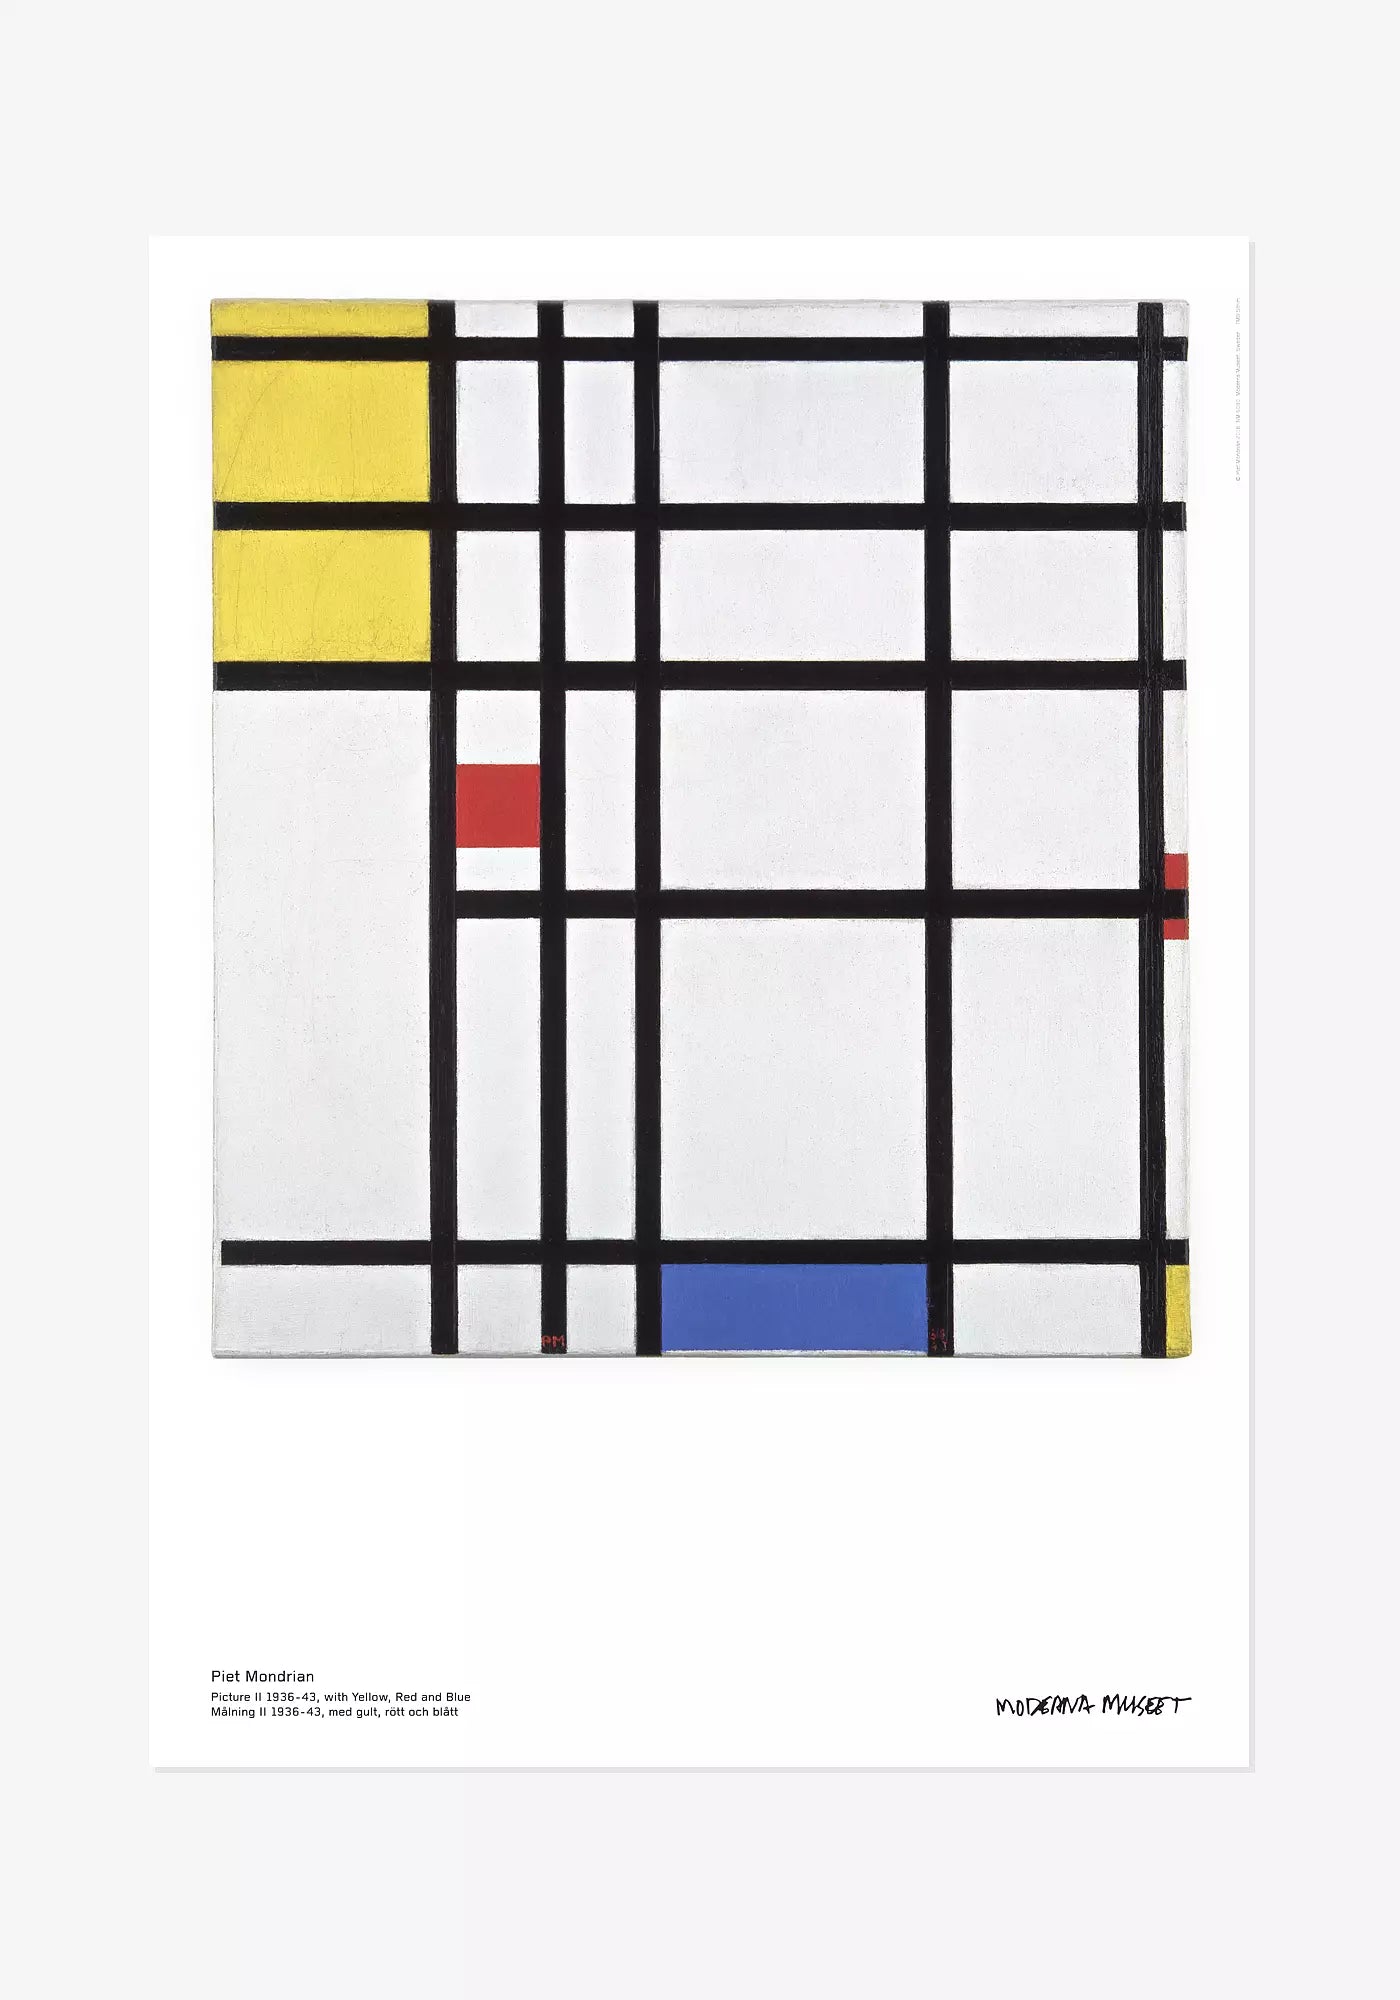 Piet Mondrian / Picture II 1932-43 with yellow, red and blue